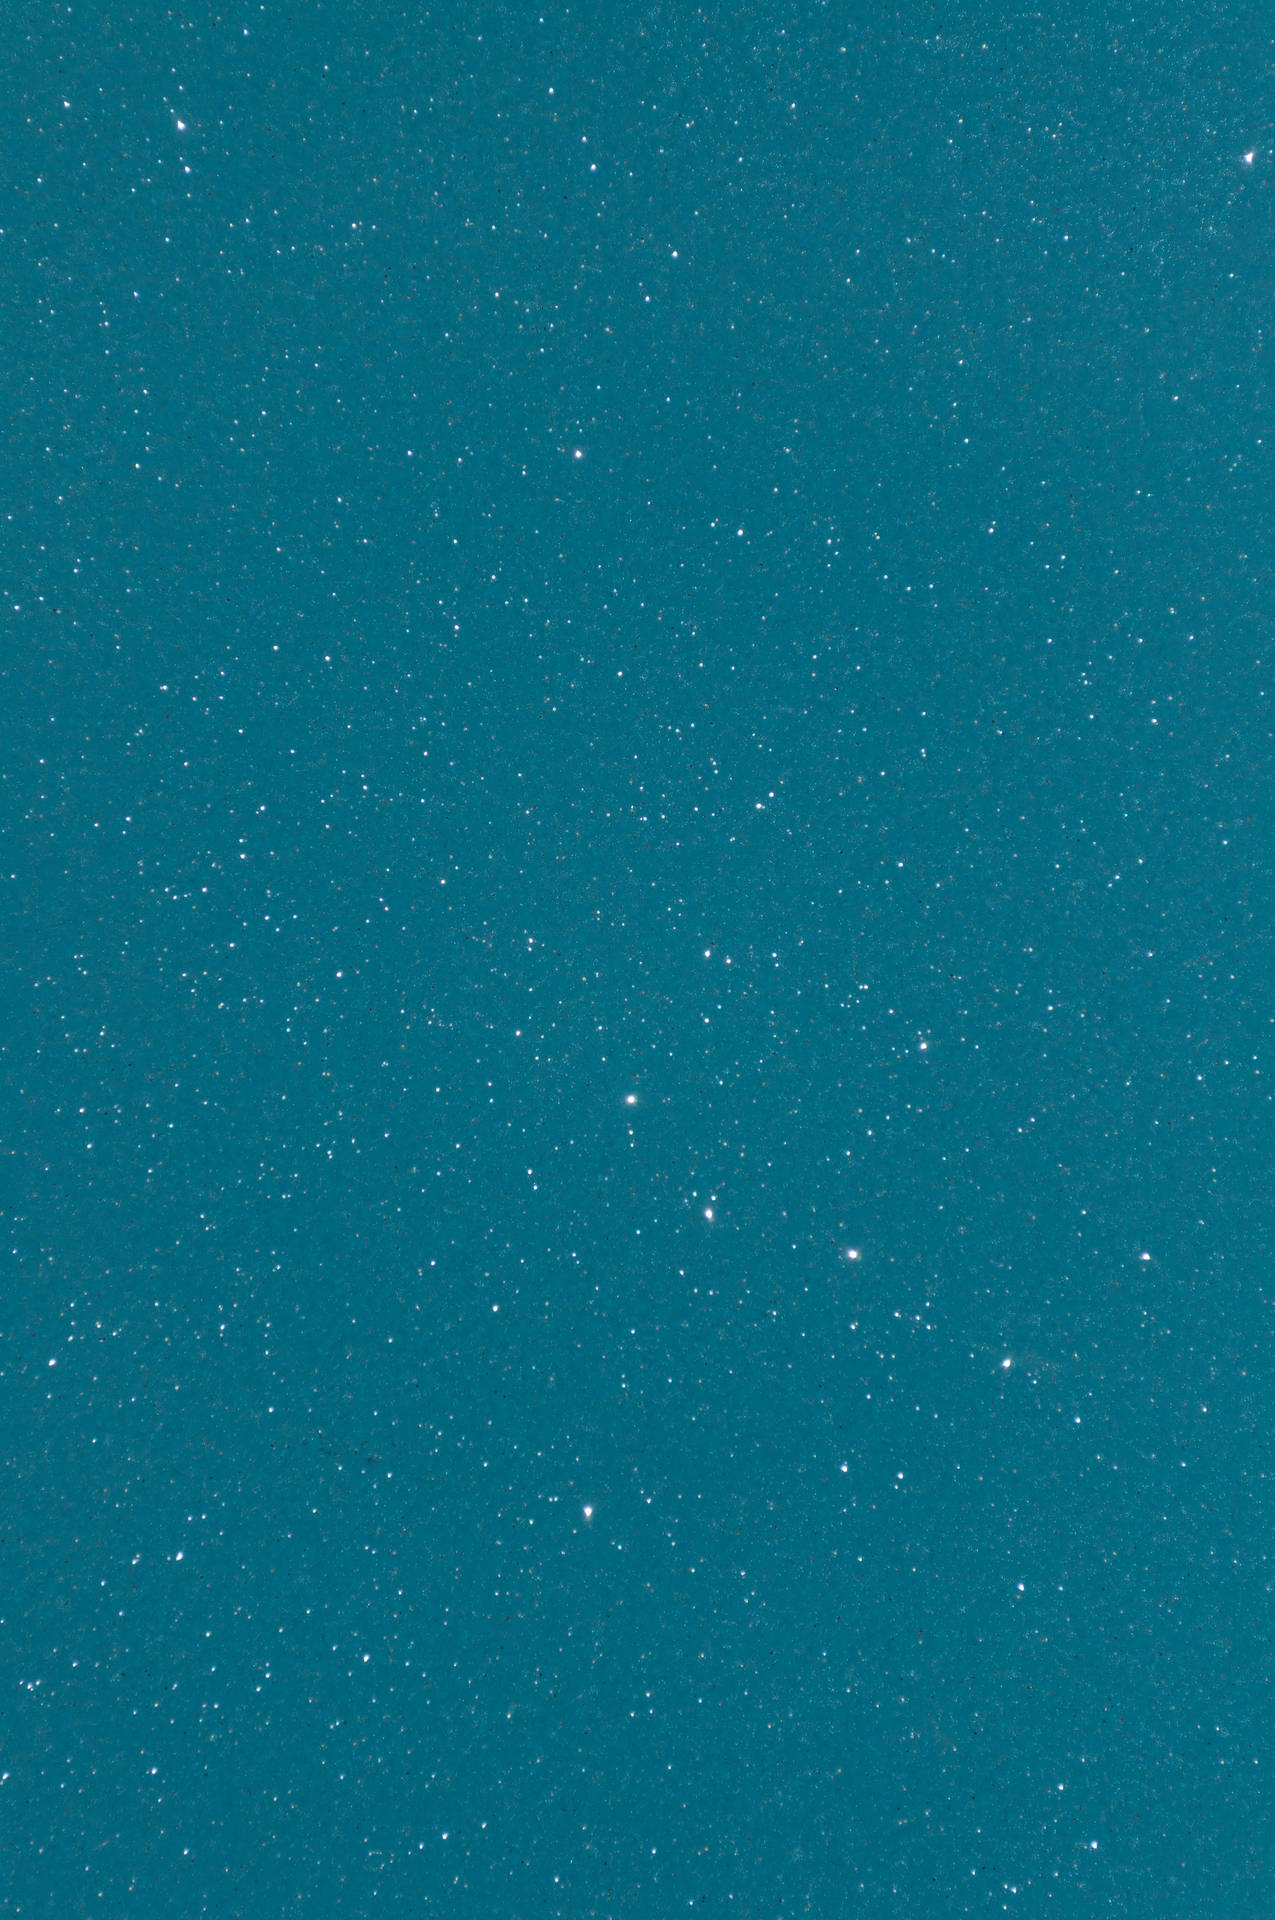 Teal Starry Night Background